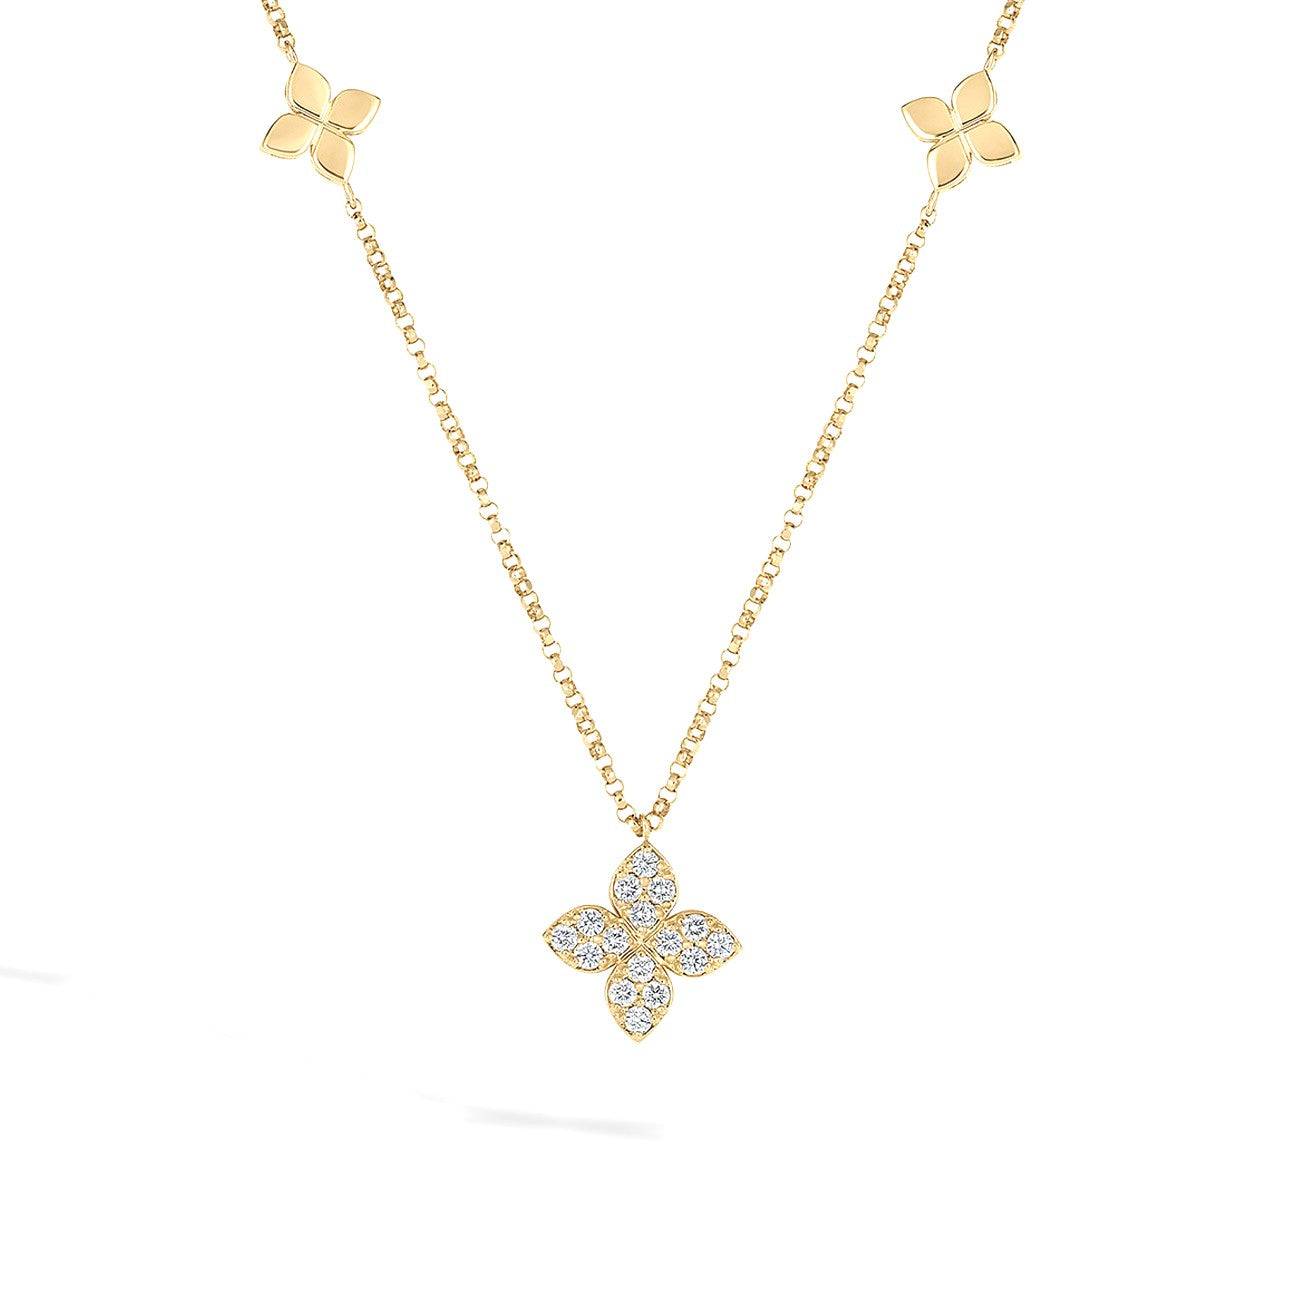 18K YELLOW GOLD LOVE BY THE INCH 5 STATION FLOWER NECKLACE